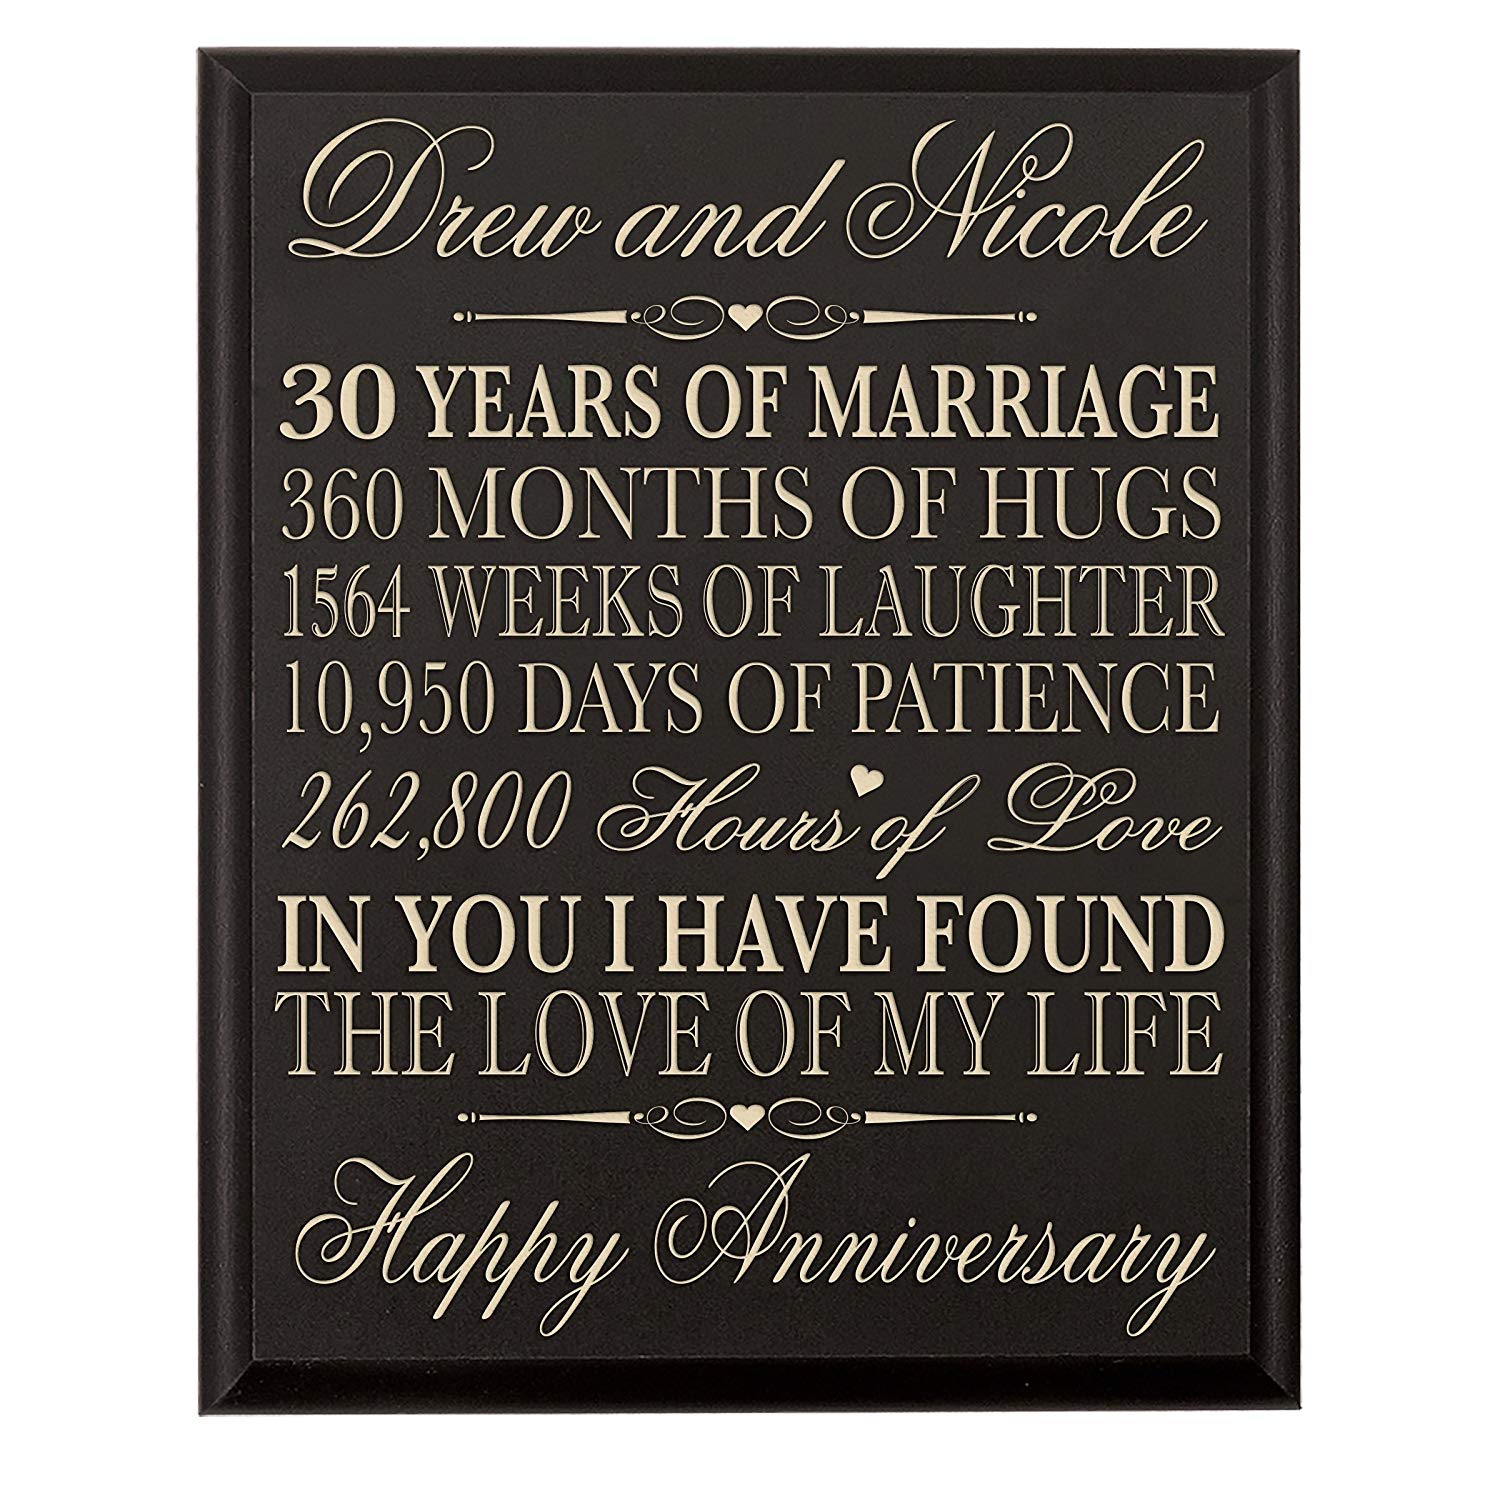 Personalized 30th Anniversary Wall Plaque Gift - Love Of My Life - LifeSong Milestones